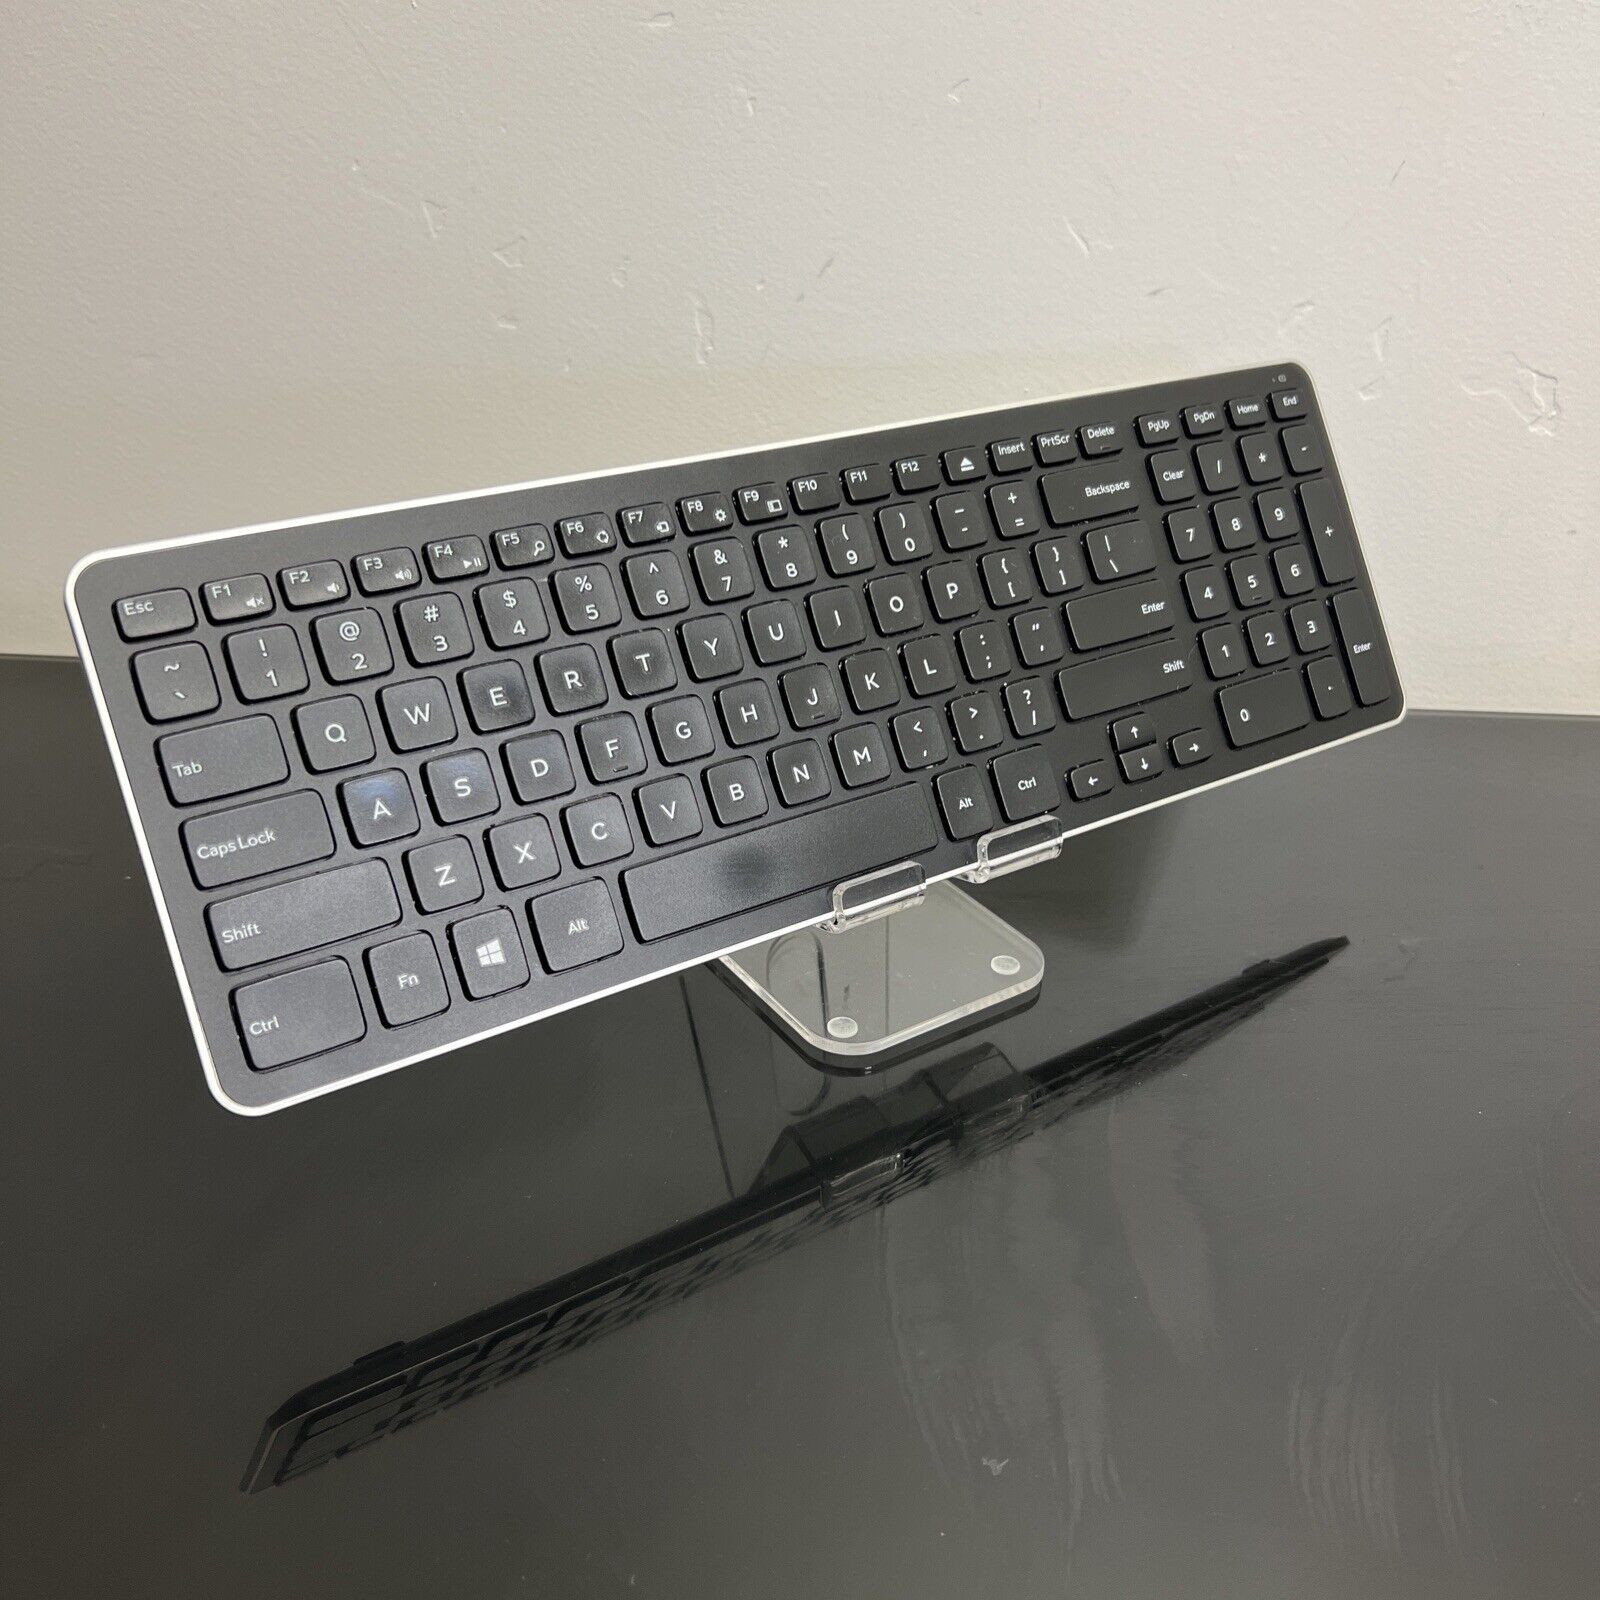 Dell - KM714 - Black Ultra-Thin Wireless Keyboard - USB Dongle Not Included